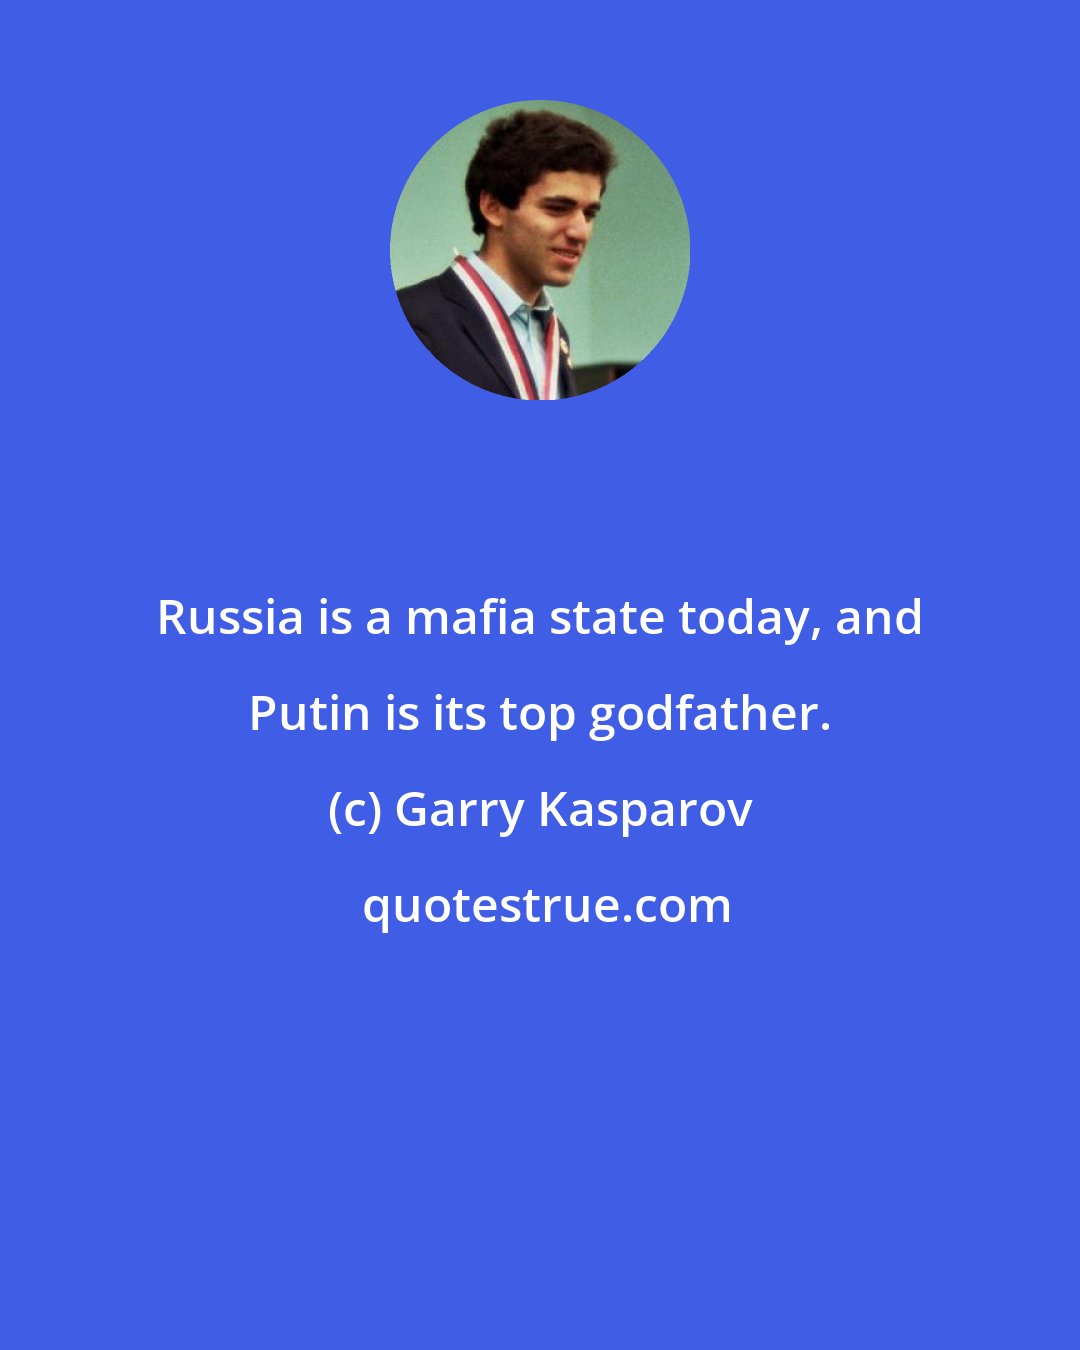 Garry Kasparov: Russia is a mafia state today, and Putin is its top godfather.